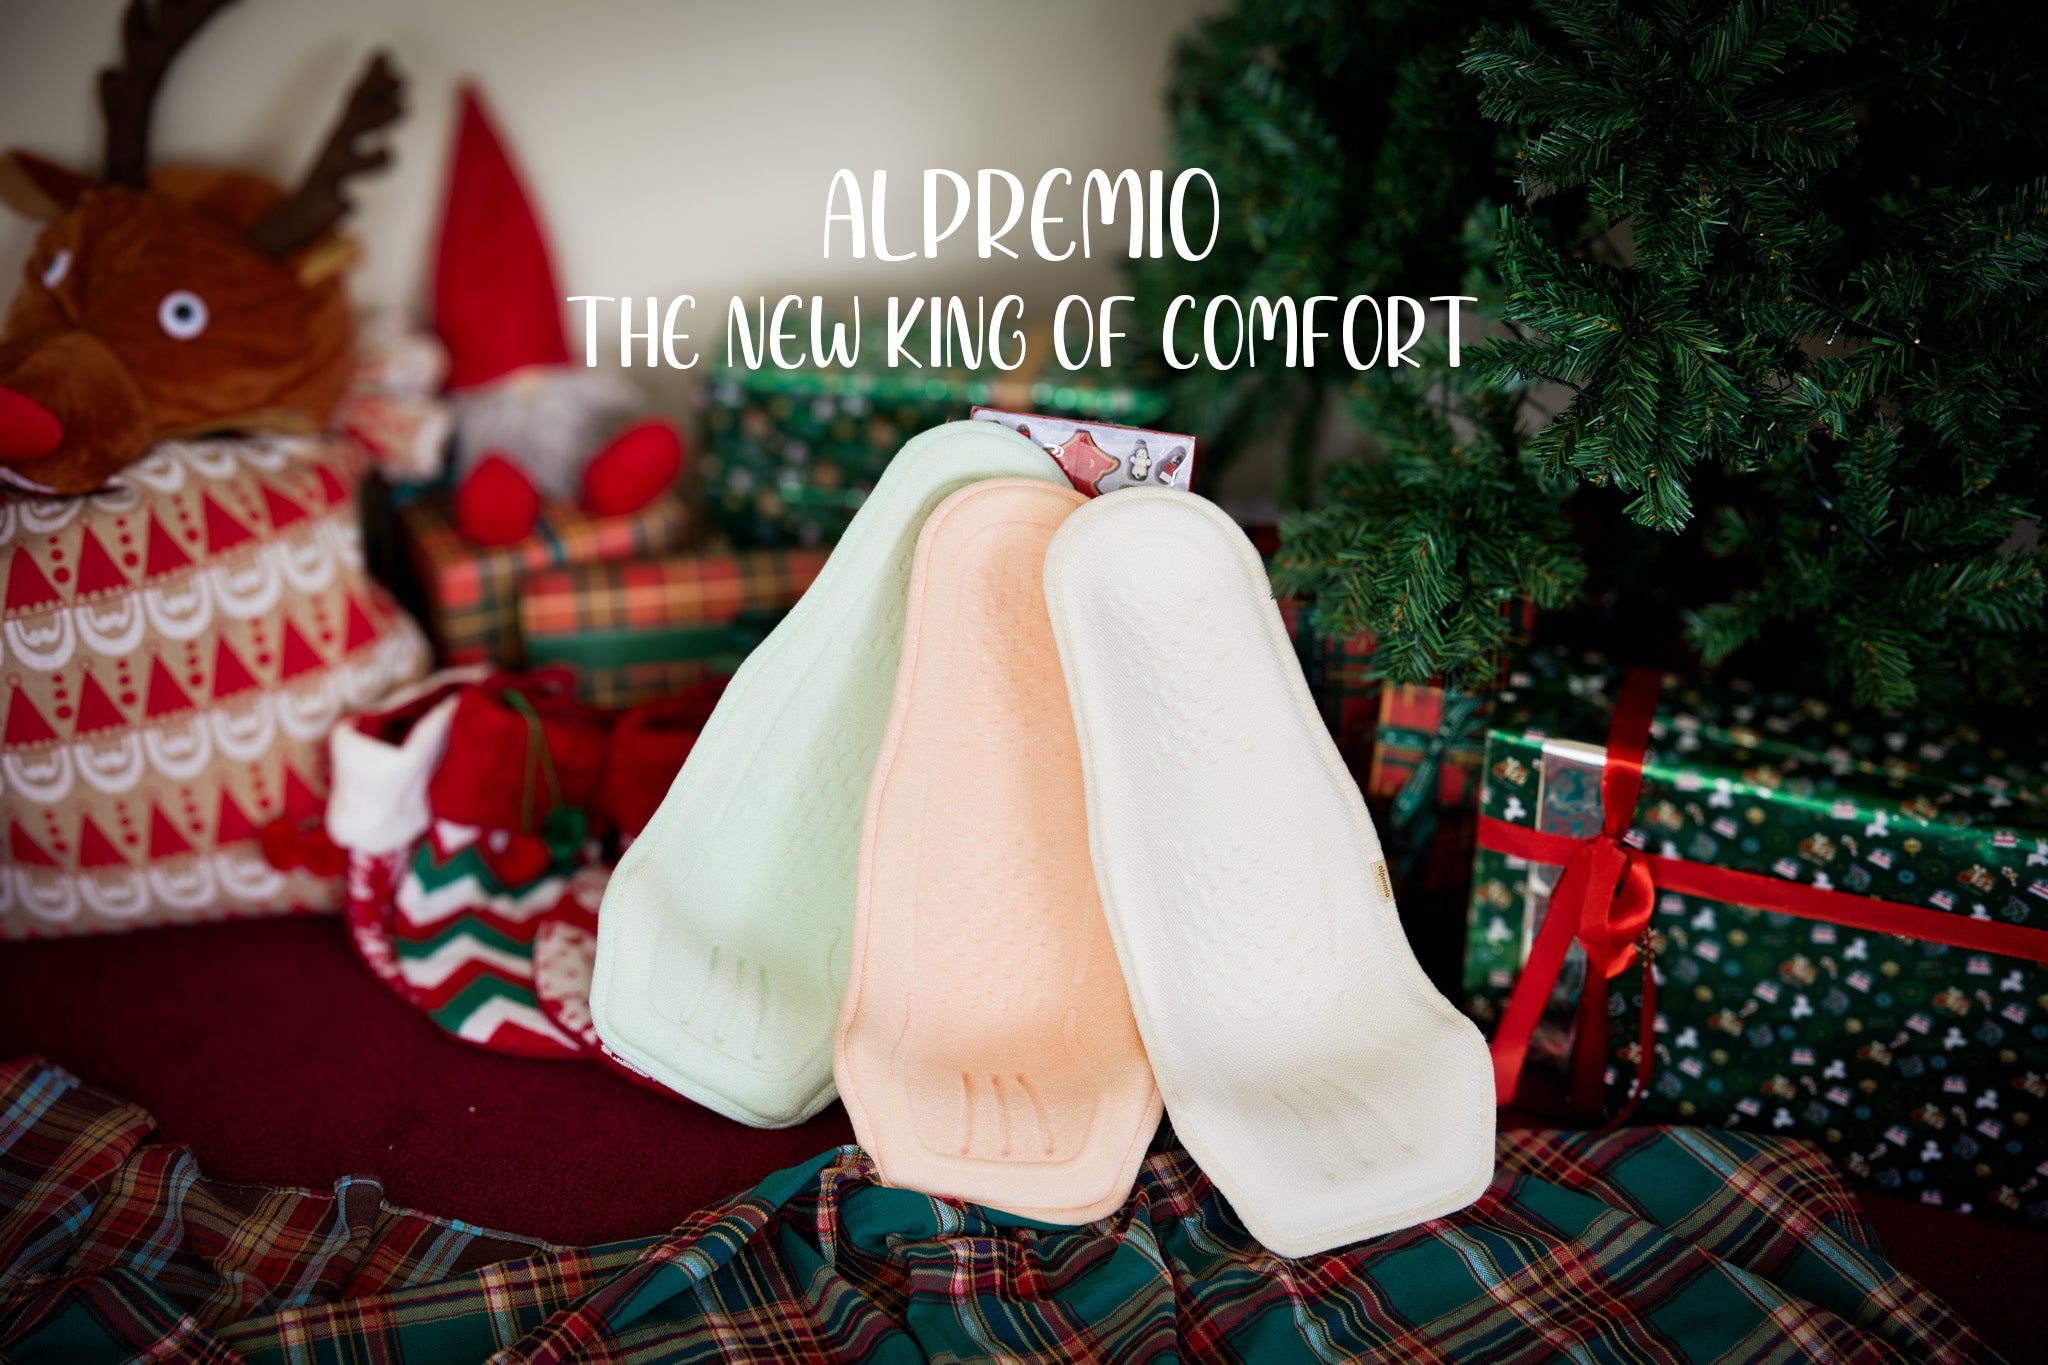 Ditch the Pillow, Hug the Seat: Why Alpremio is the New King of Comfort for Feeding Time